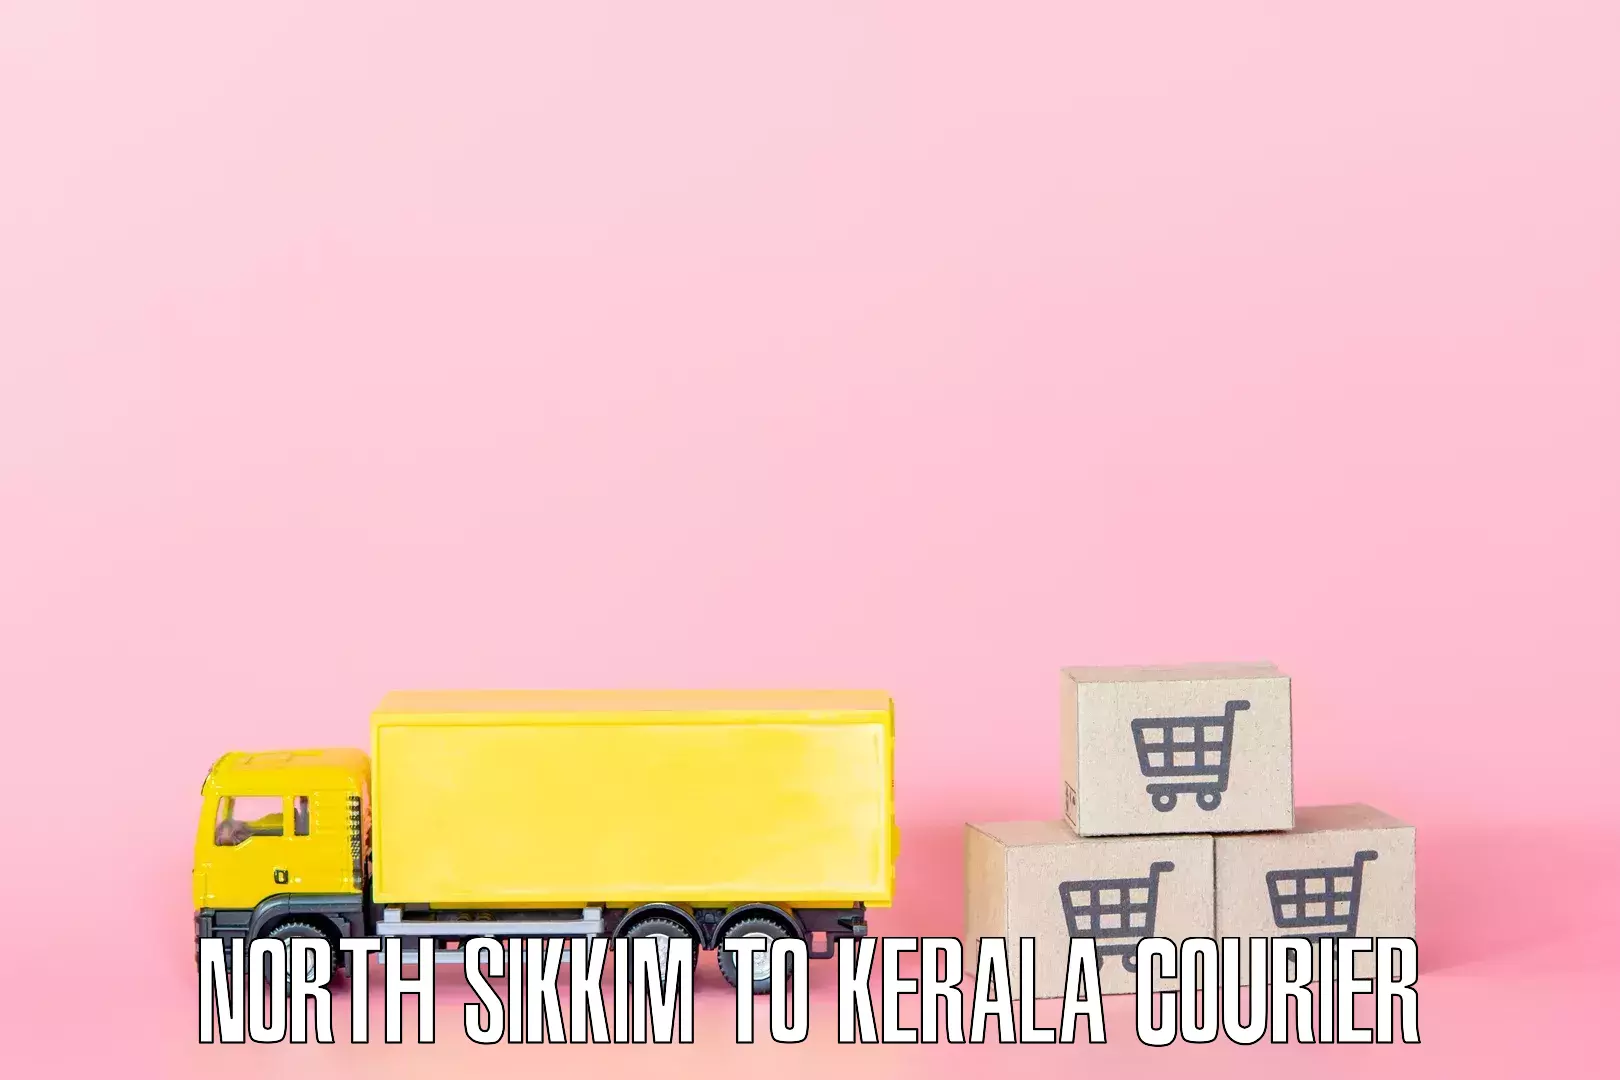 Specialized furniture moving North Sikkim to Kerala